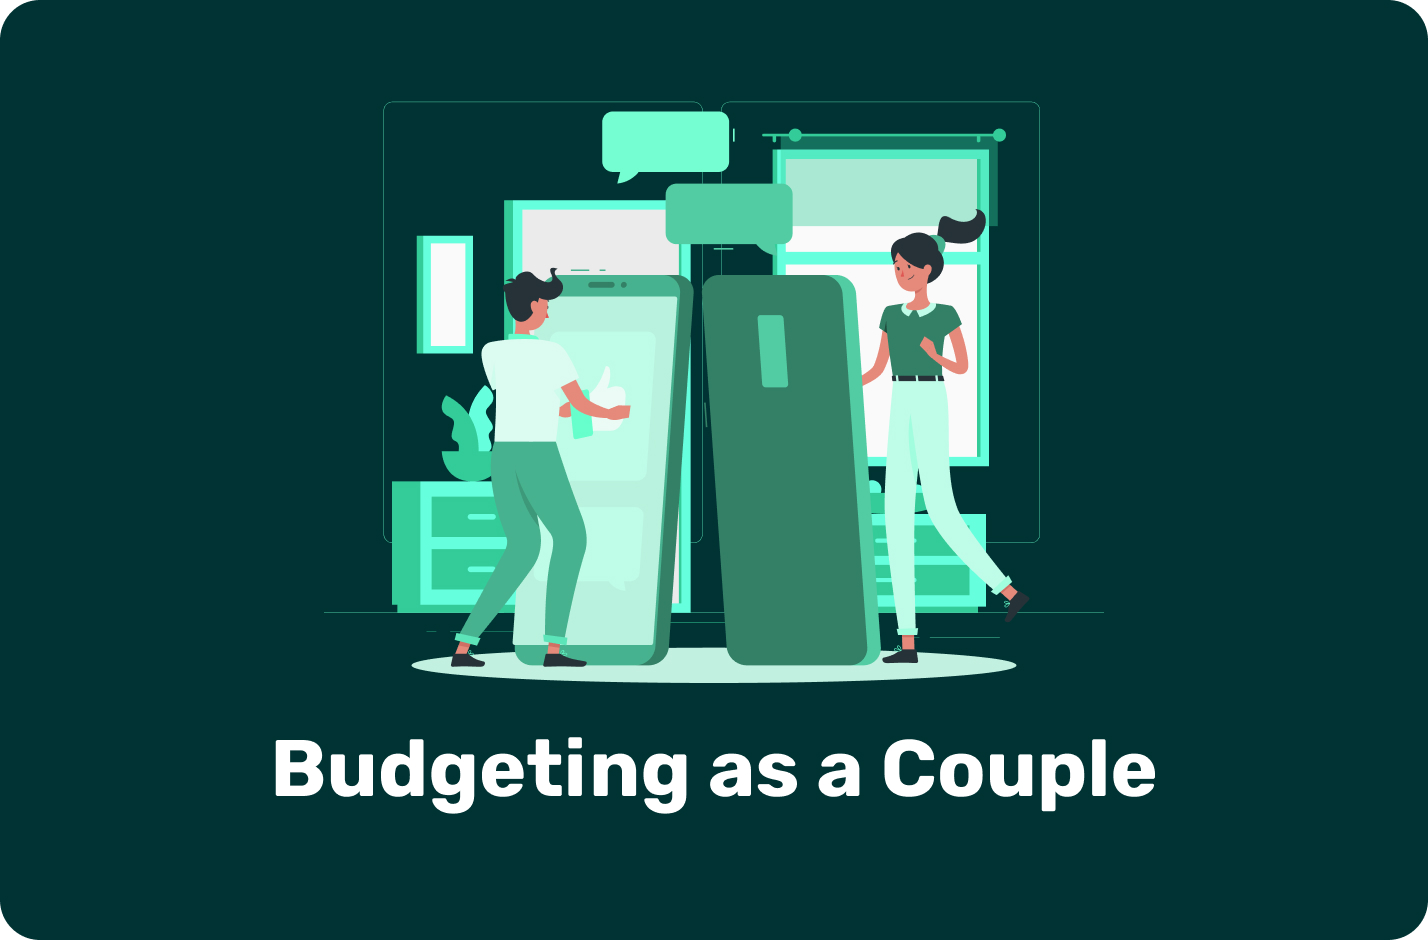 Budgeting as a couple